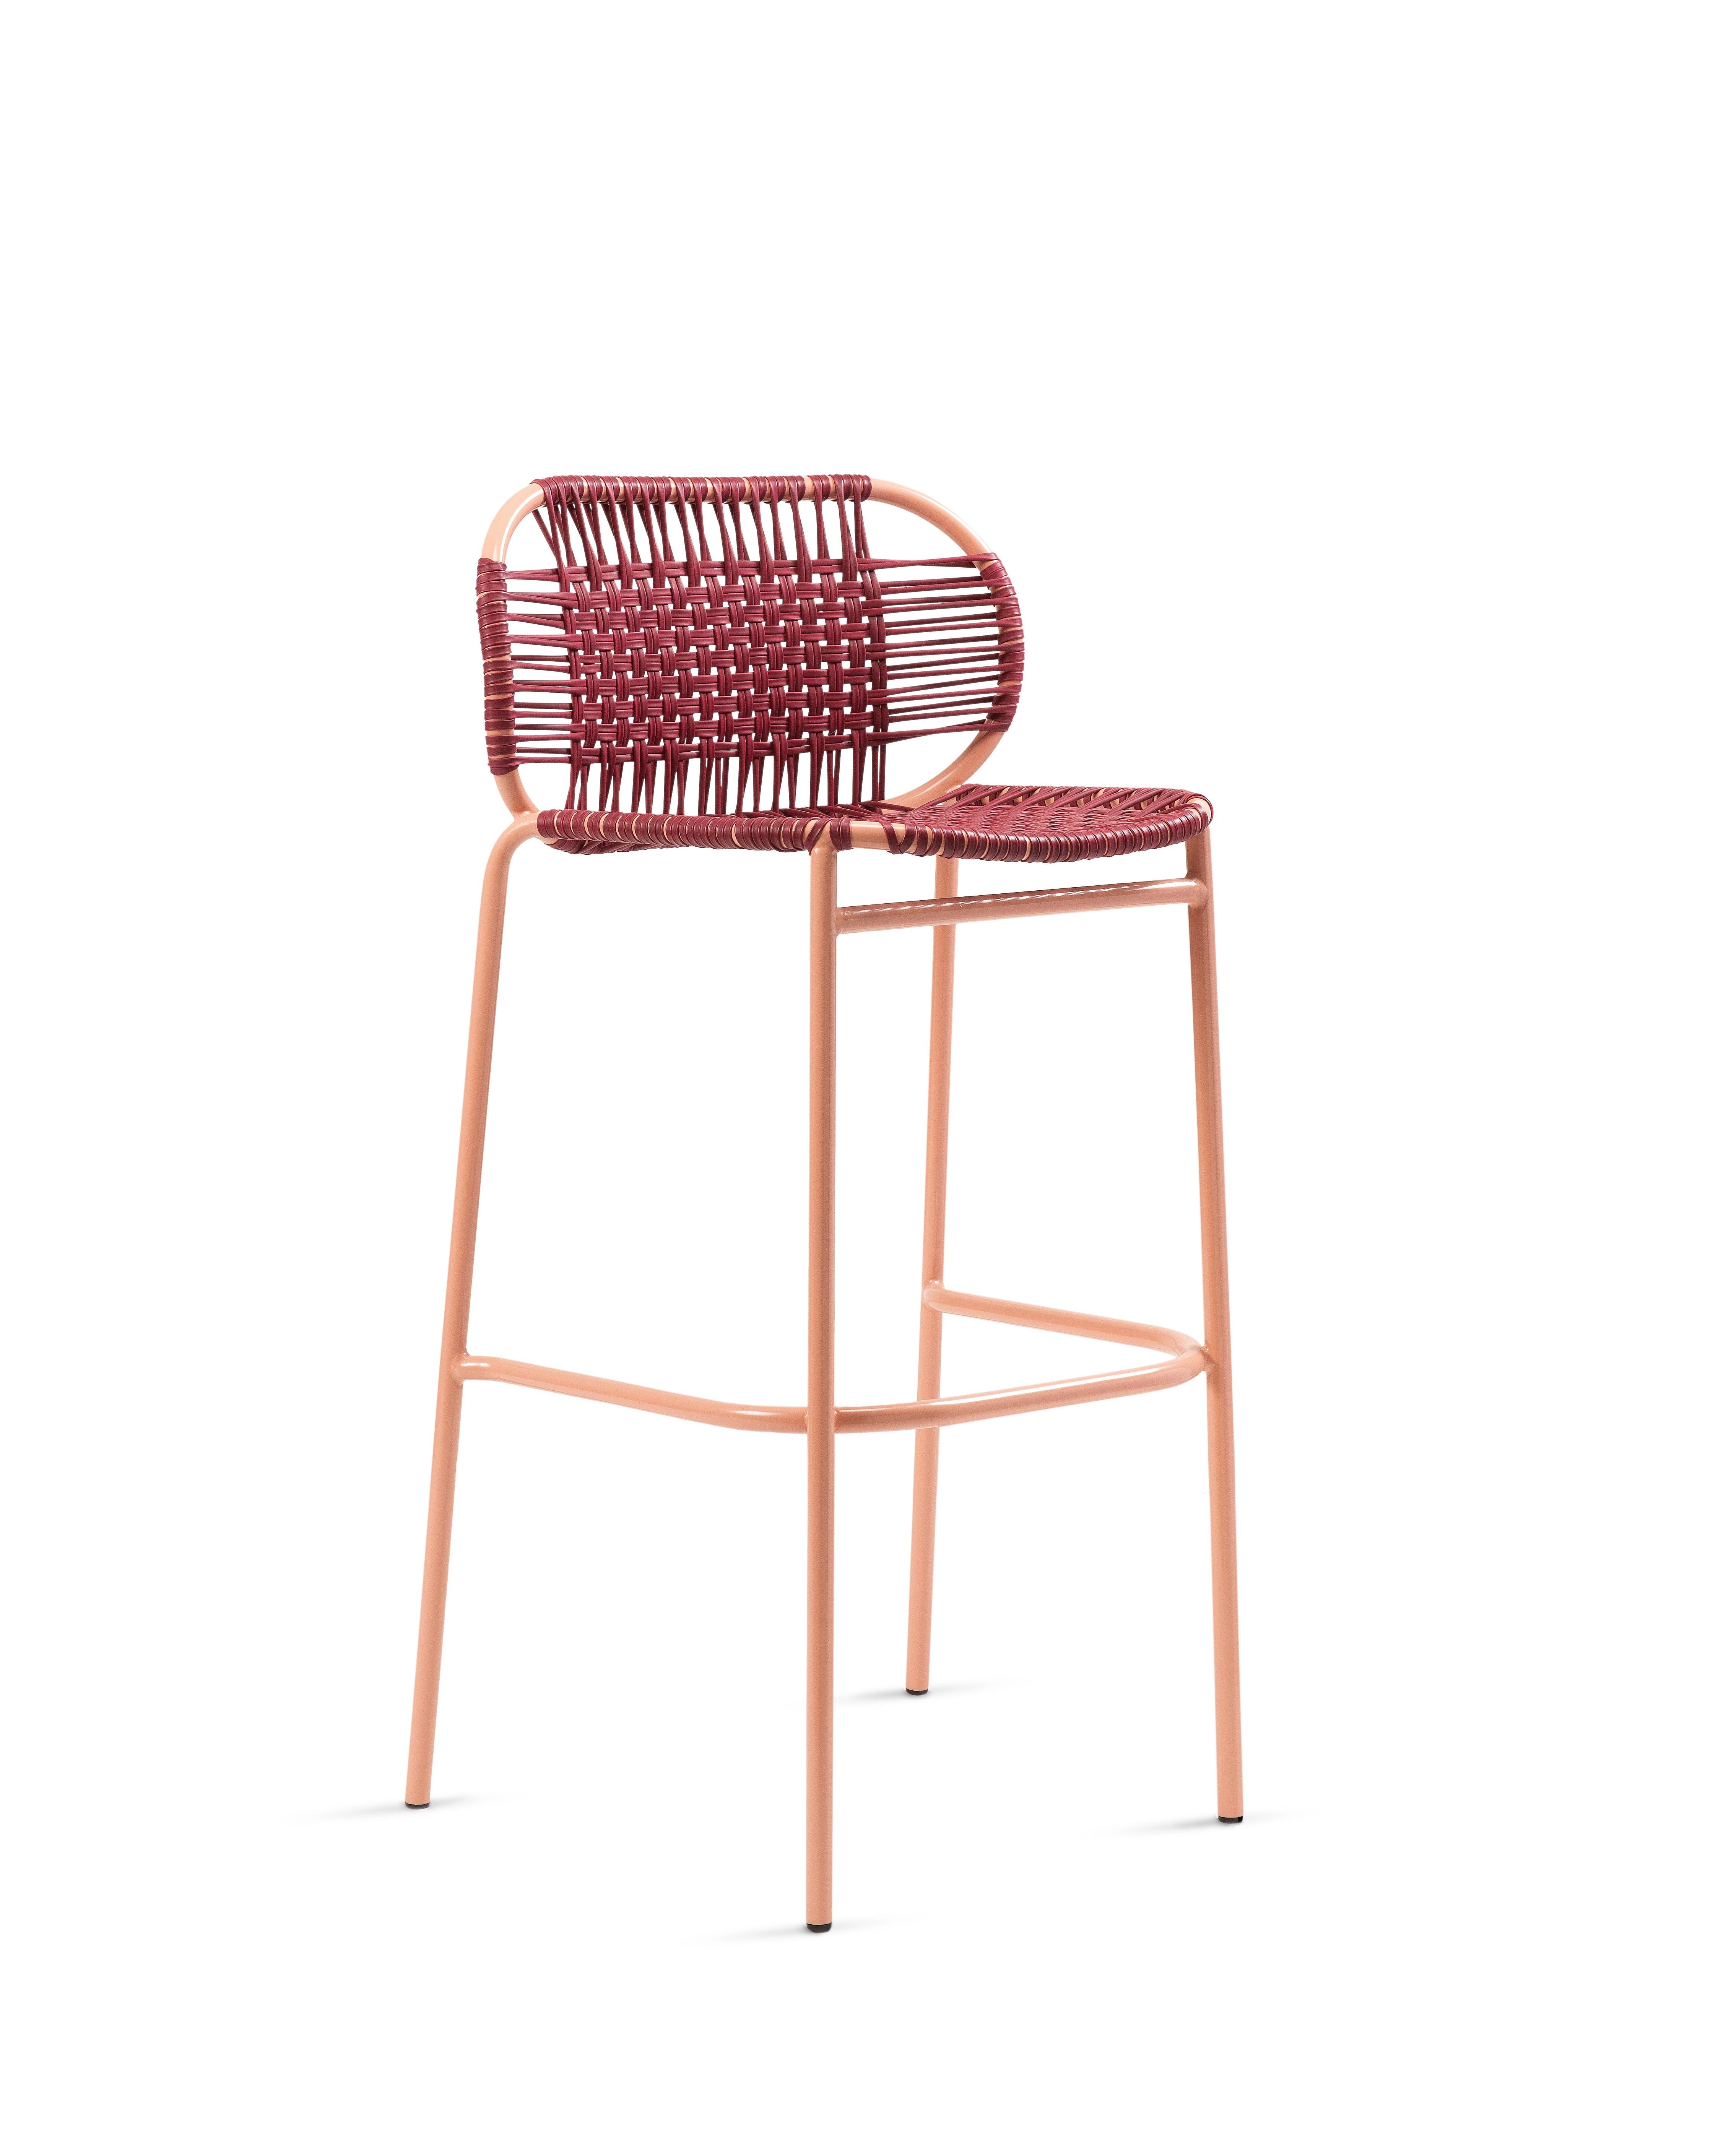 Set of 2 purple Cielo bar stool by Sebastian Herkner
Materials: Galvanized and powder-coated tubular steel. PVC strings are made from recycled plastic.
Technique: Made from recycled plastic and weaved by local craftspeople in Cartagena, Colombia.